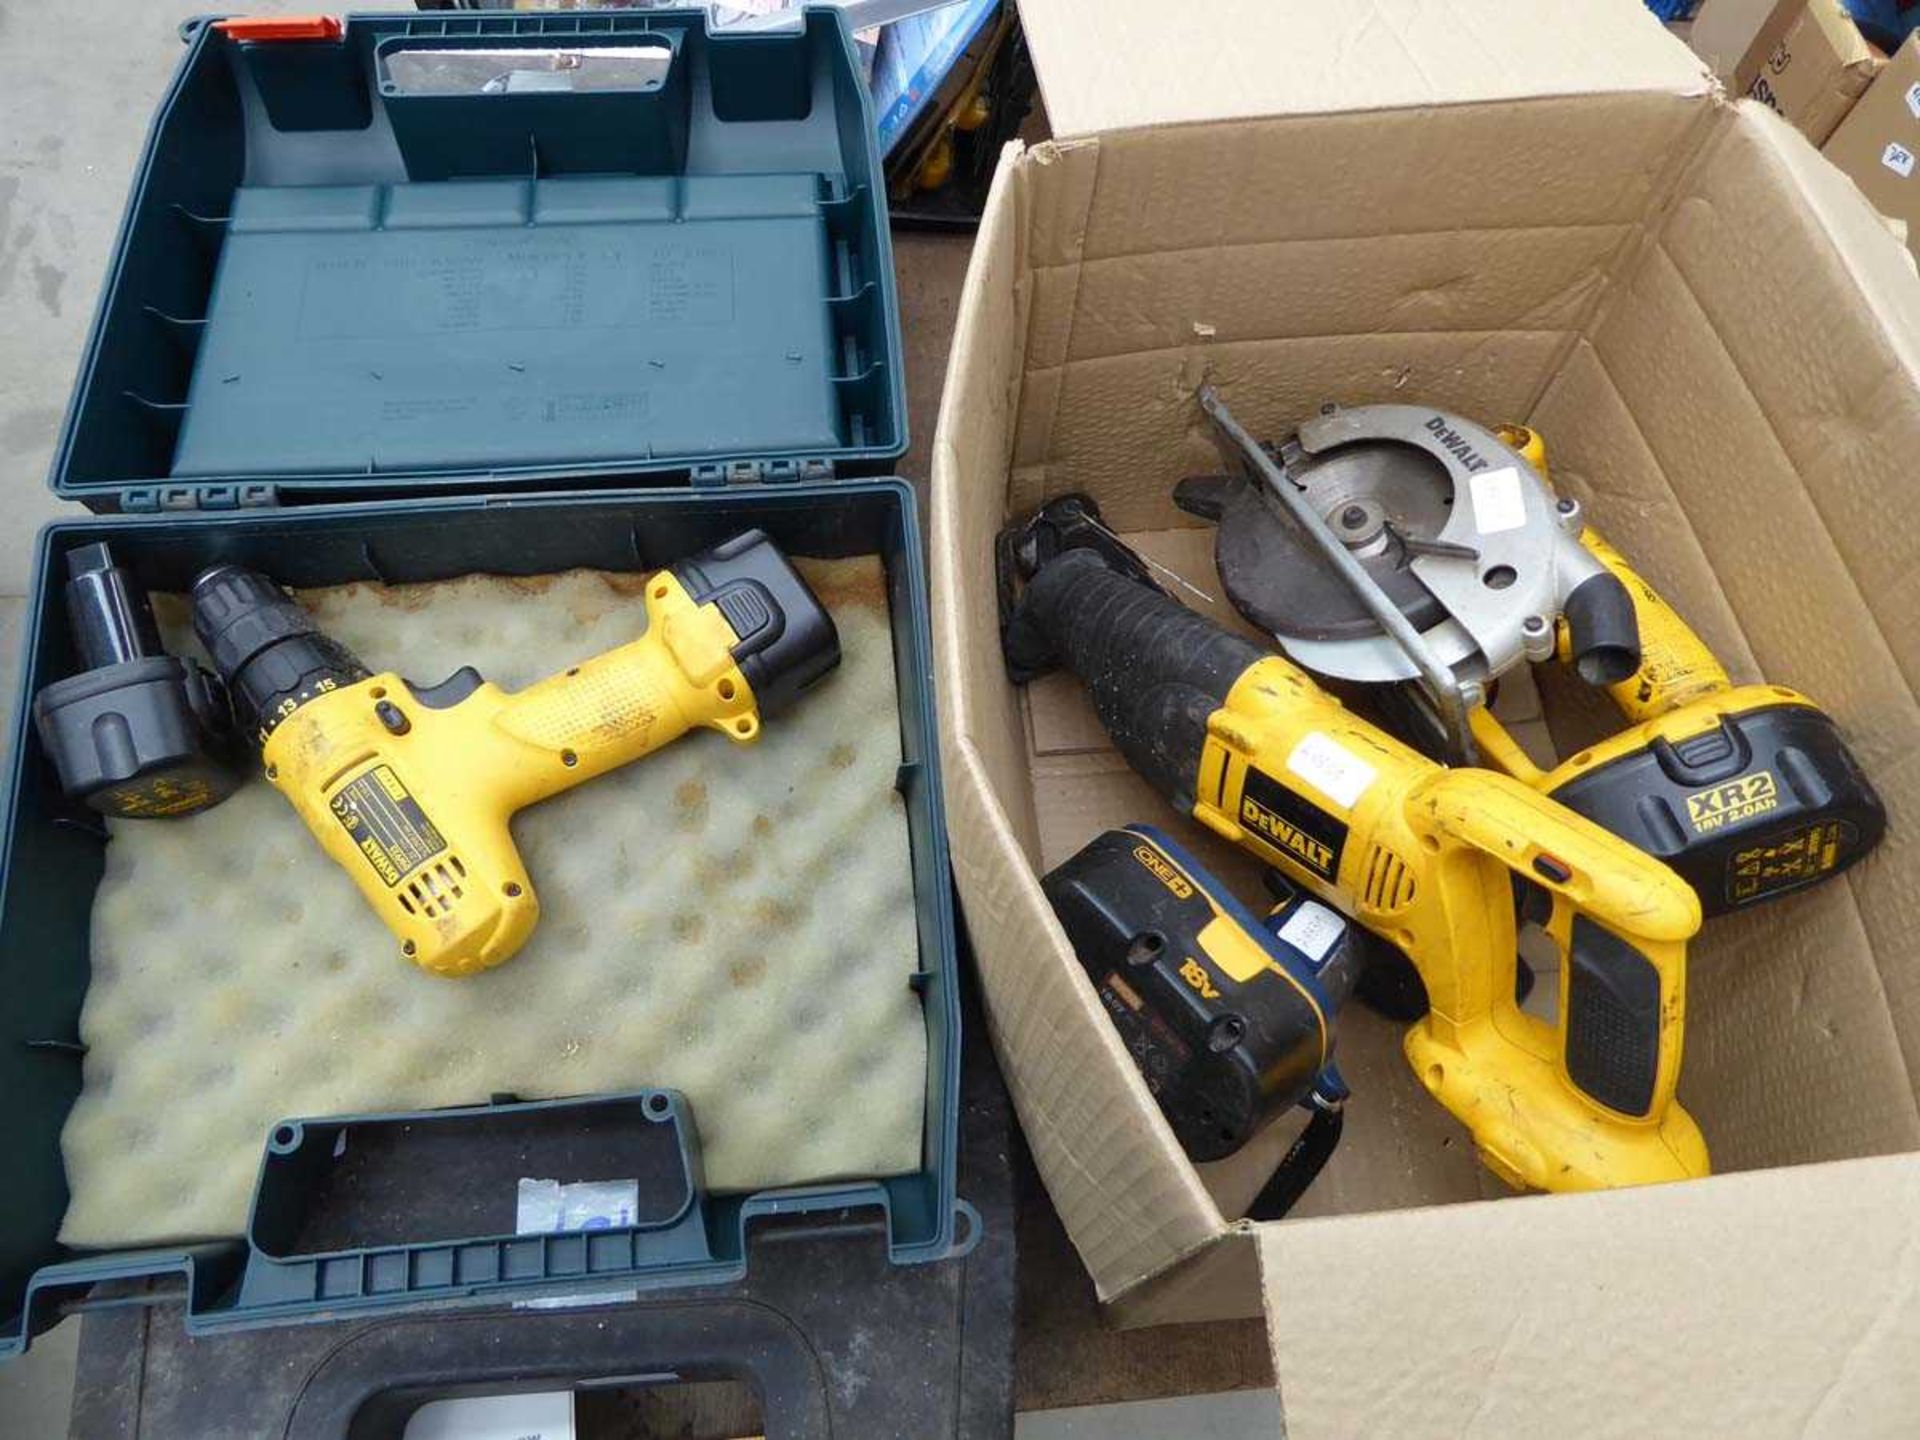 Small DeWalt battery drill and box containing used DeWalt tools